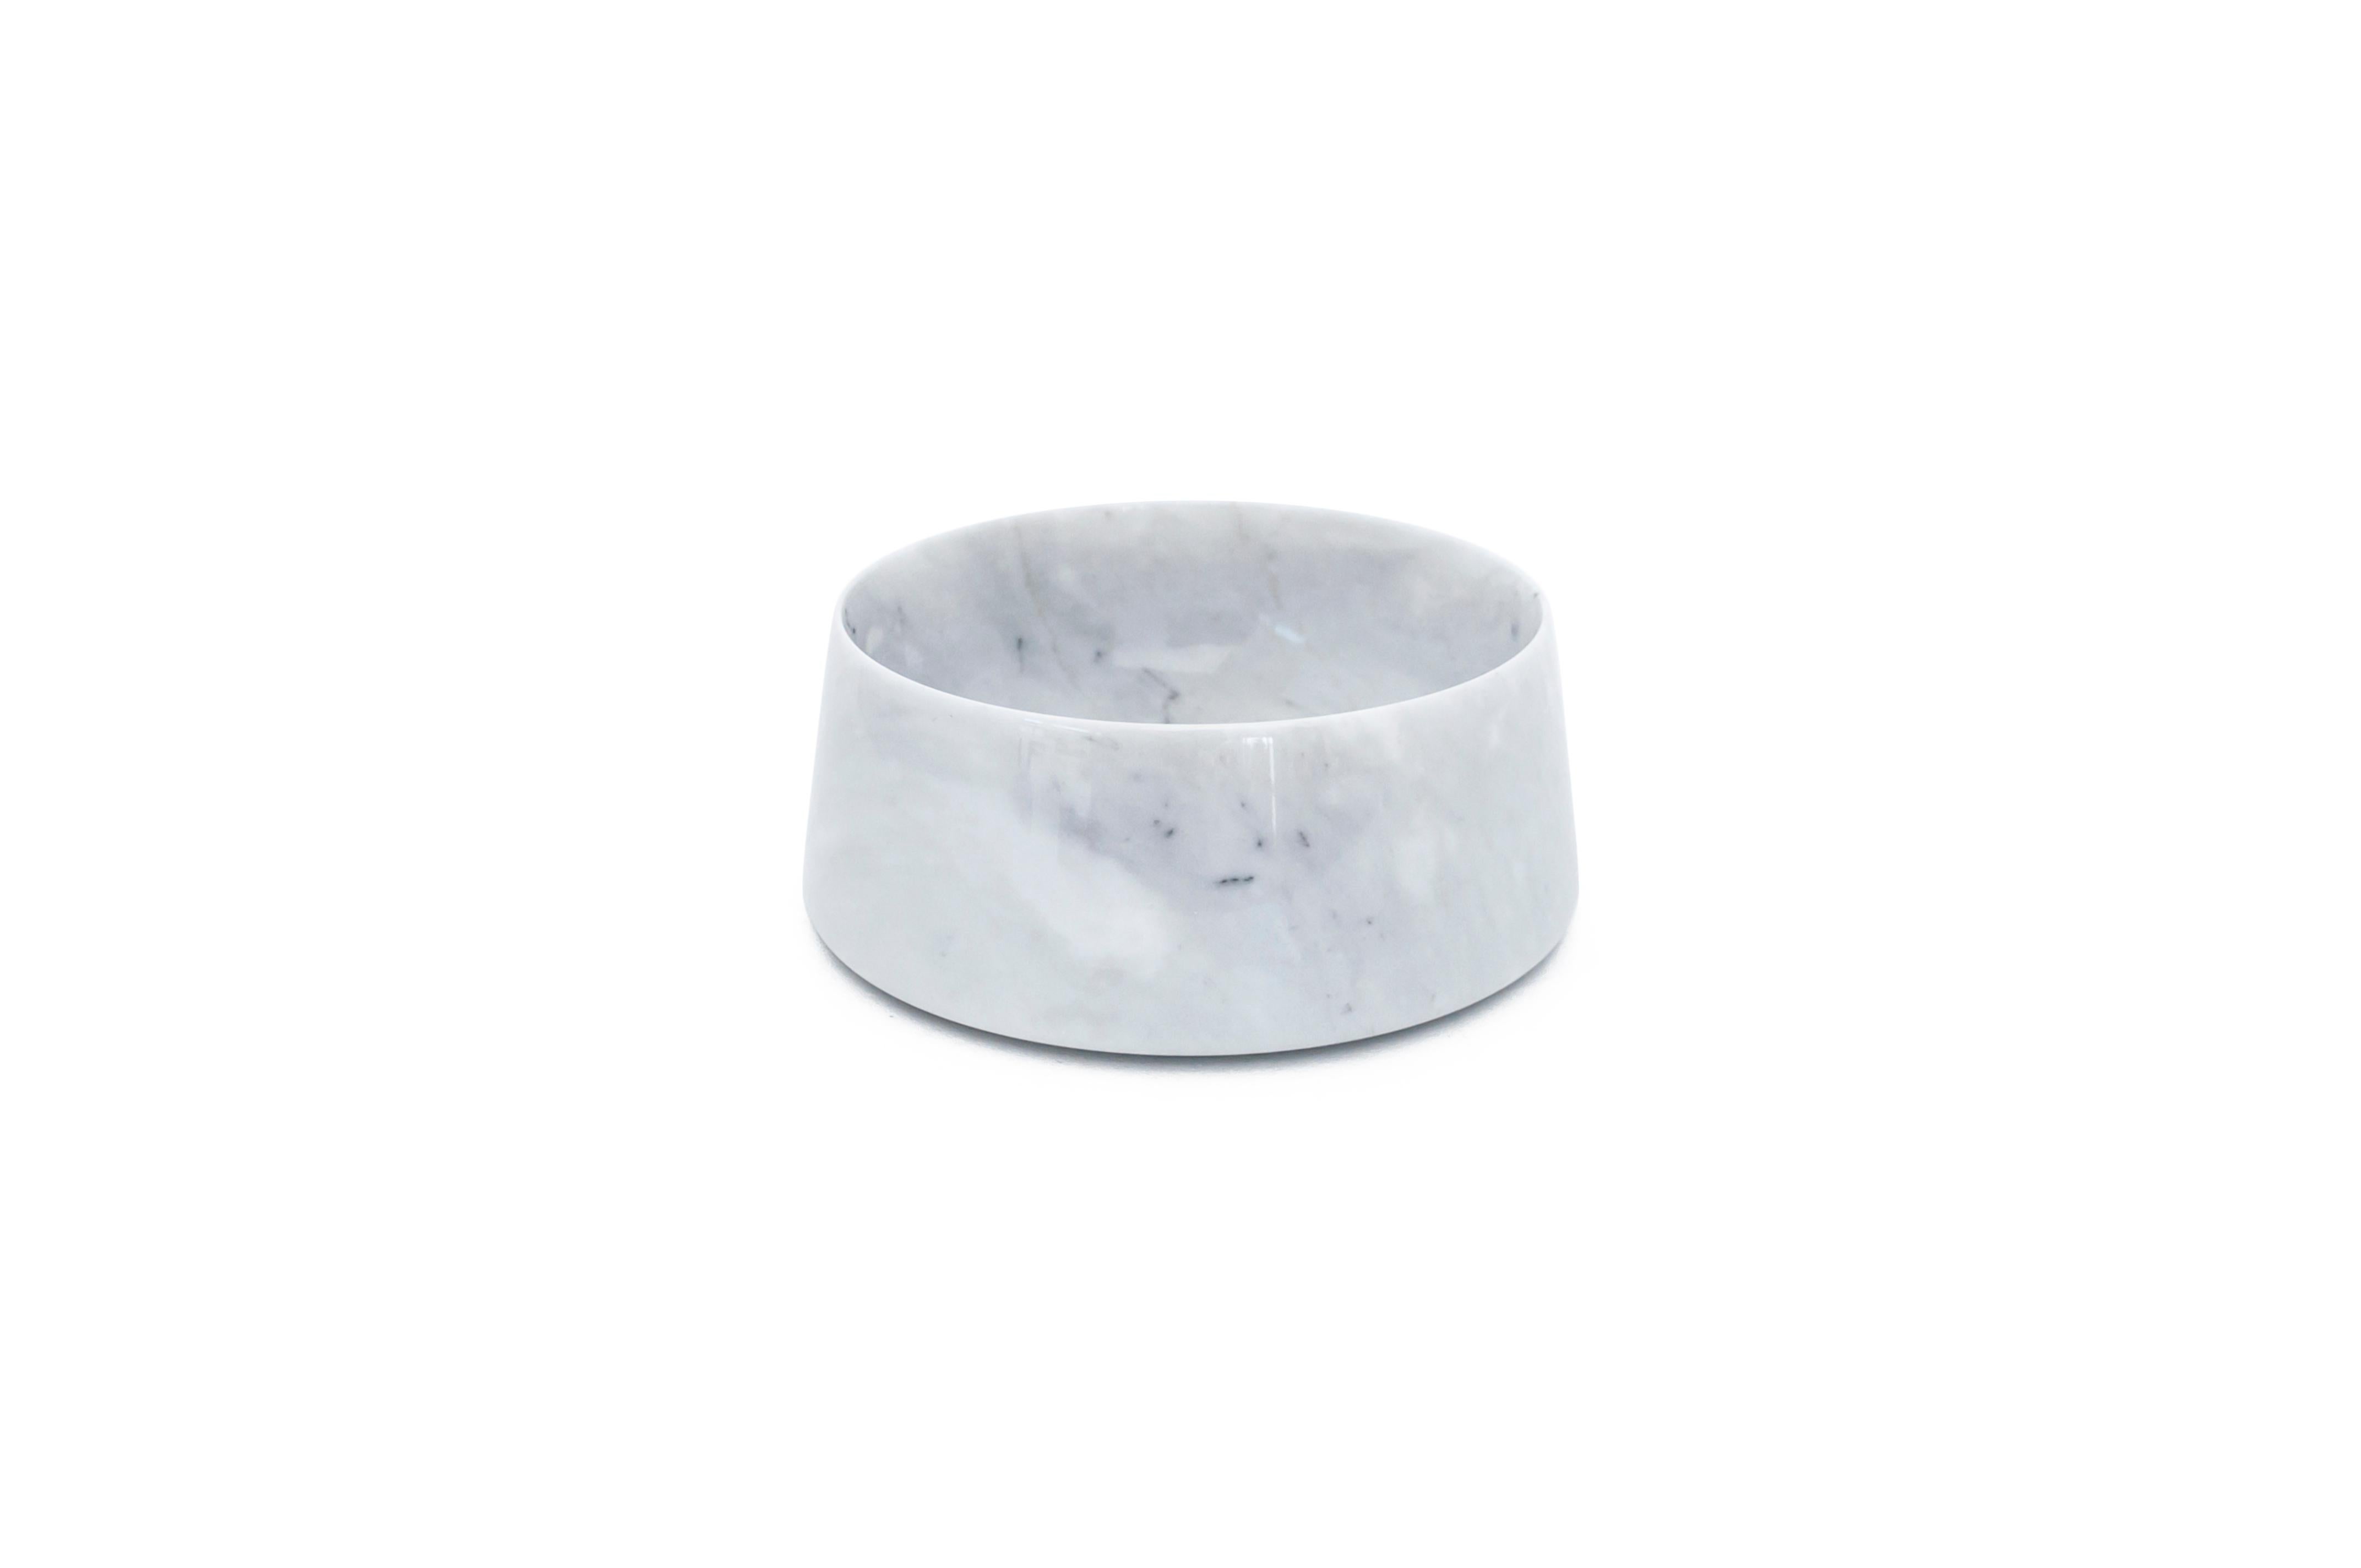 White Carrara marble bowl for cats and dogs, made in Italy, Carrara. Size Medium.
Each piece is in a way unique (every marble block is different in veins and shades) and handmade by Italian artisans specialized over generations in processing